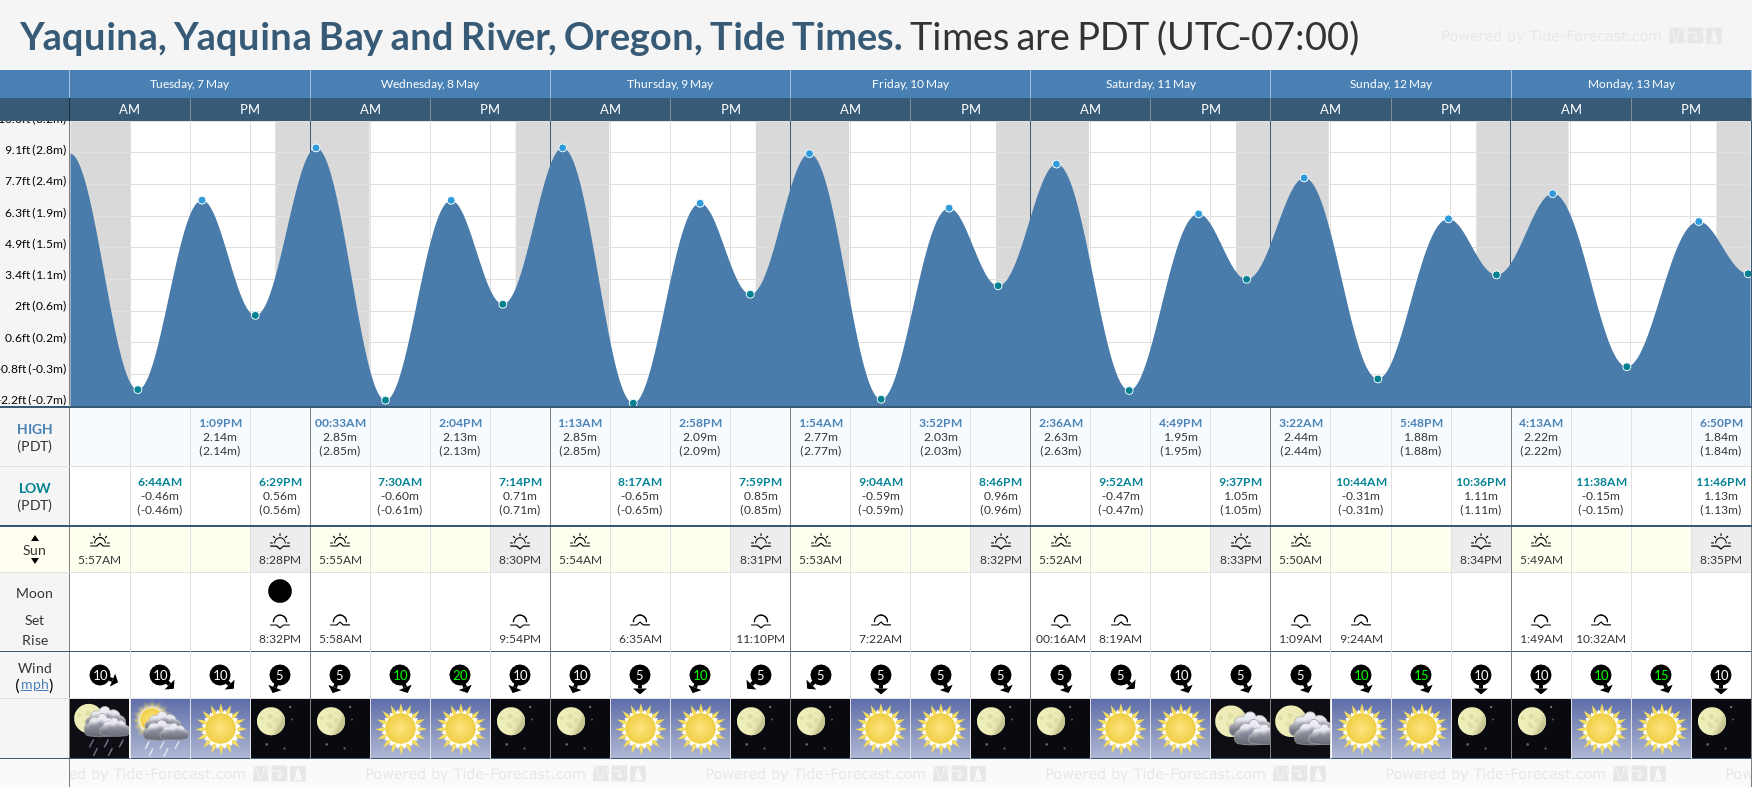 Yaquina, Yaquina Bay and River, Oregon Tide Chart including high and low tide tide times for the next 7 days